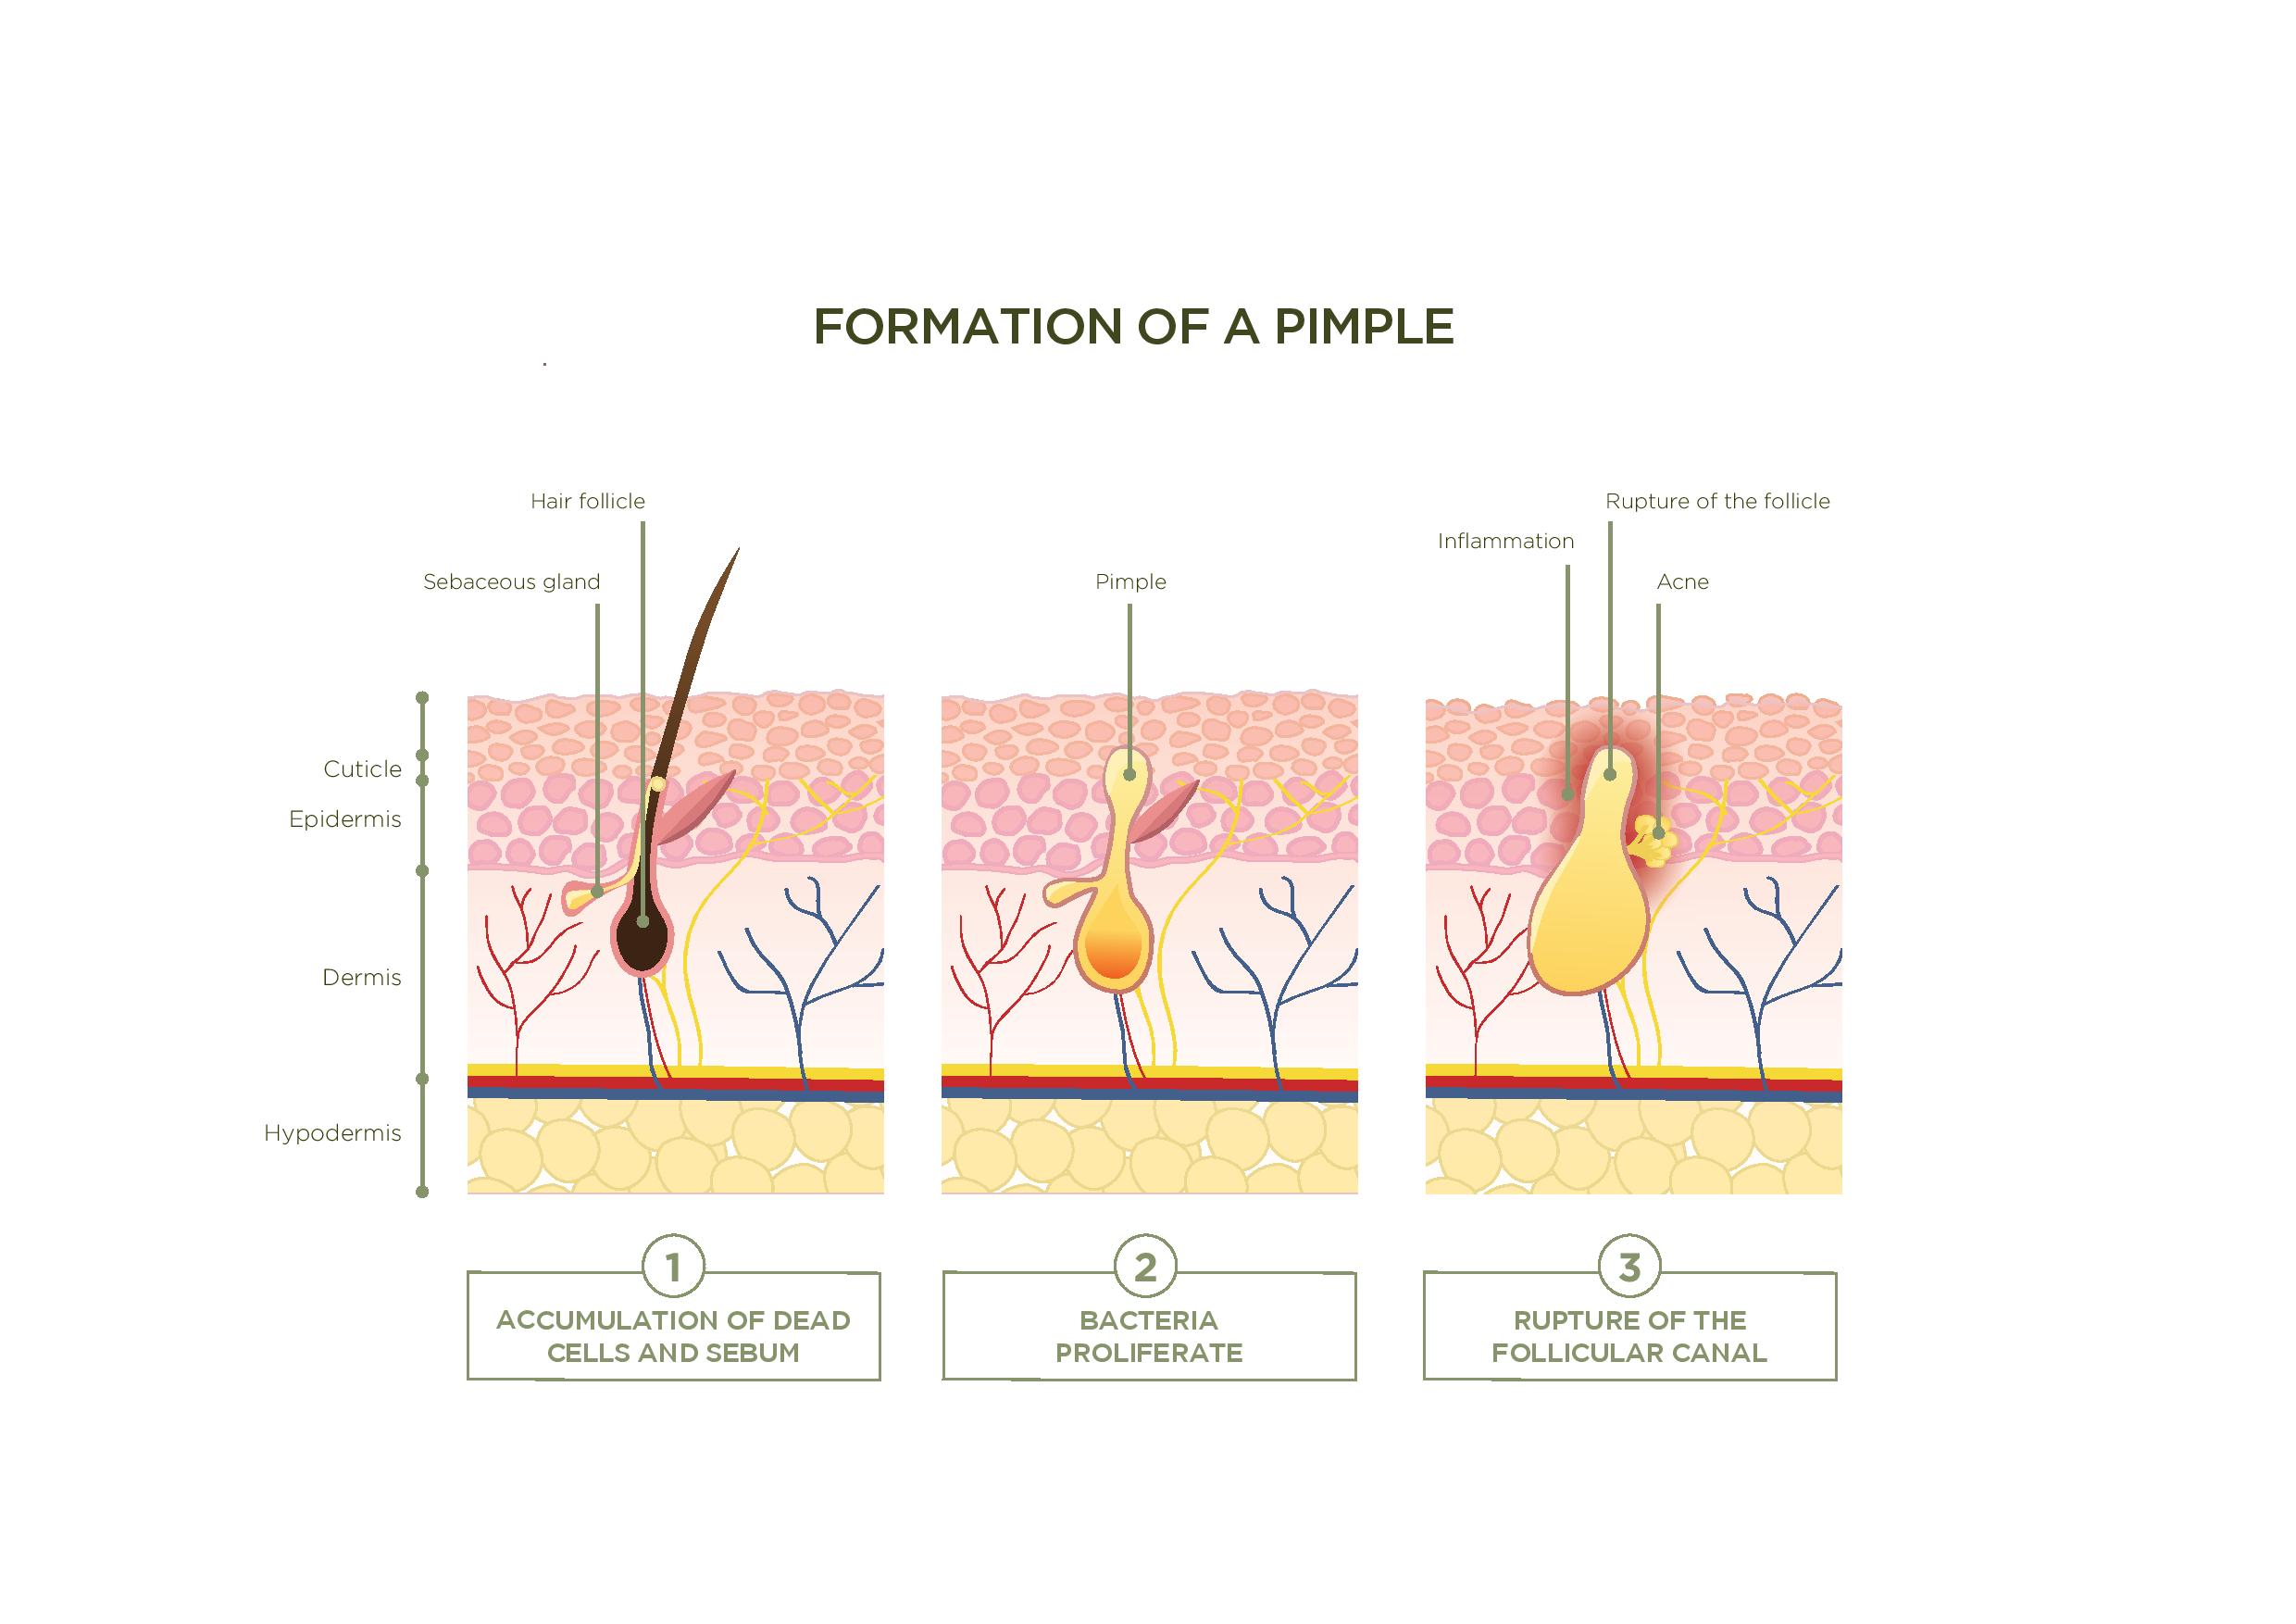 The Formation Of a Pimple: Did you Know That Pimples Take 2 Weeks to Form?